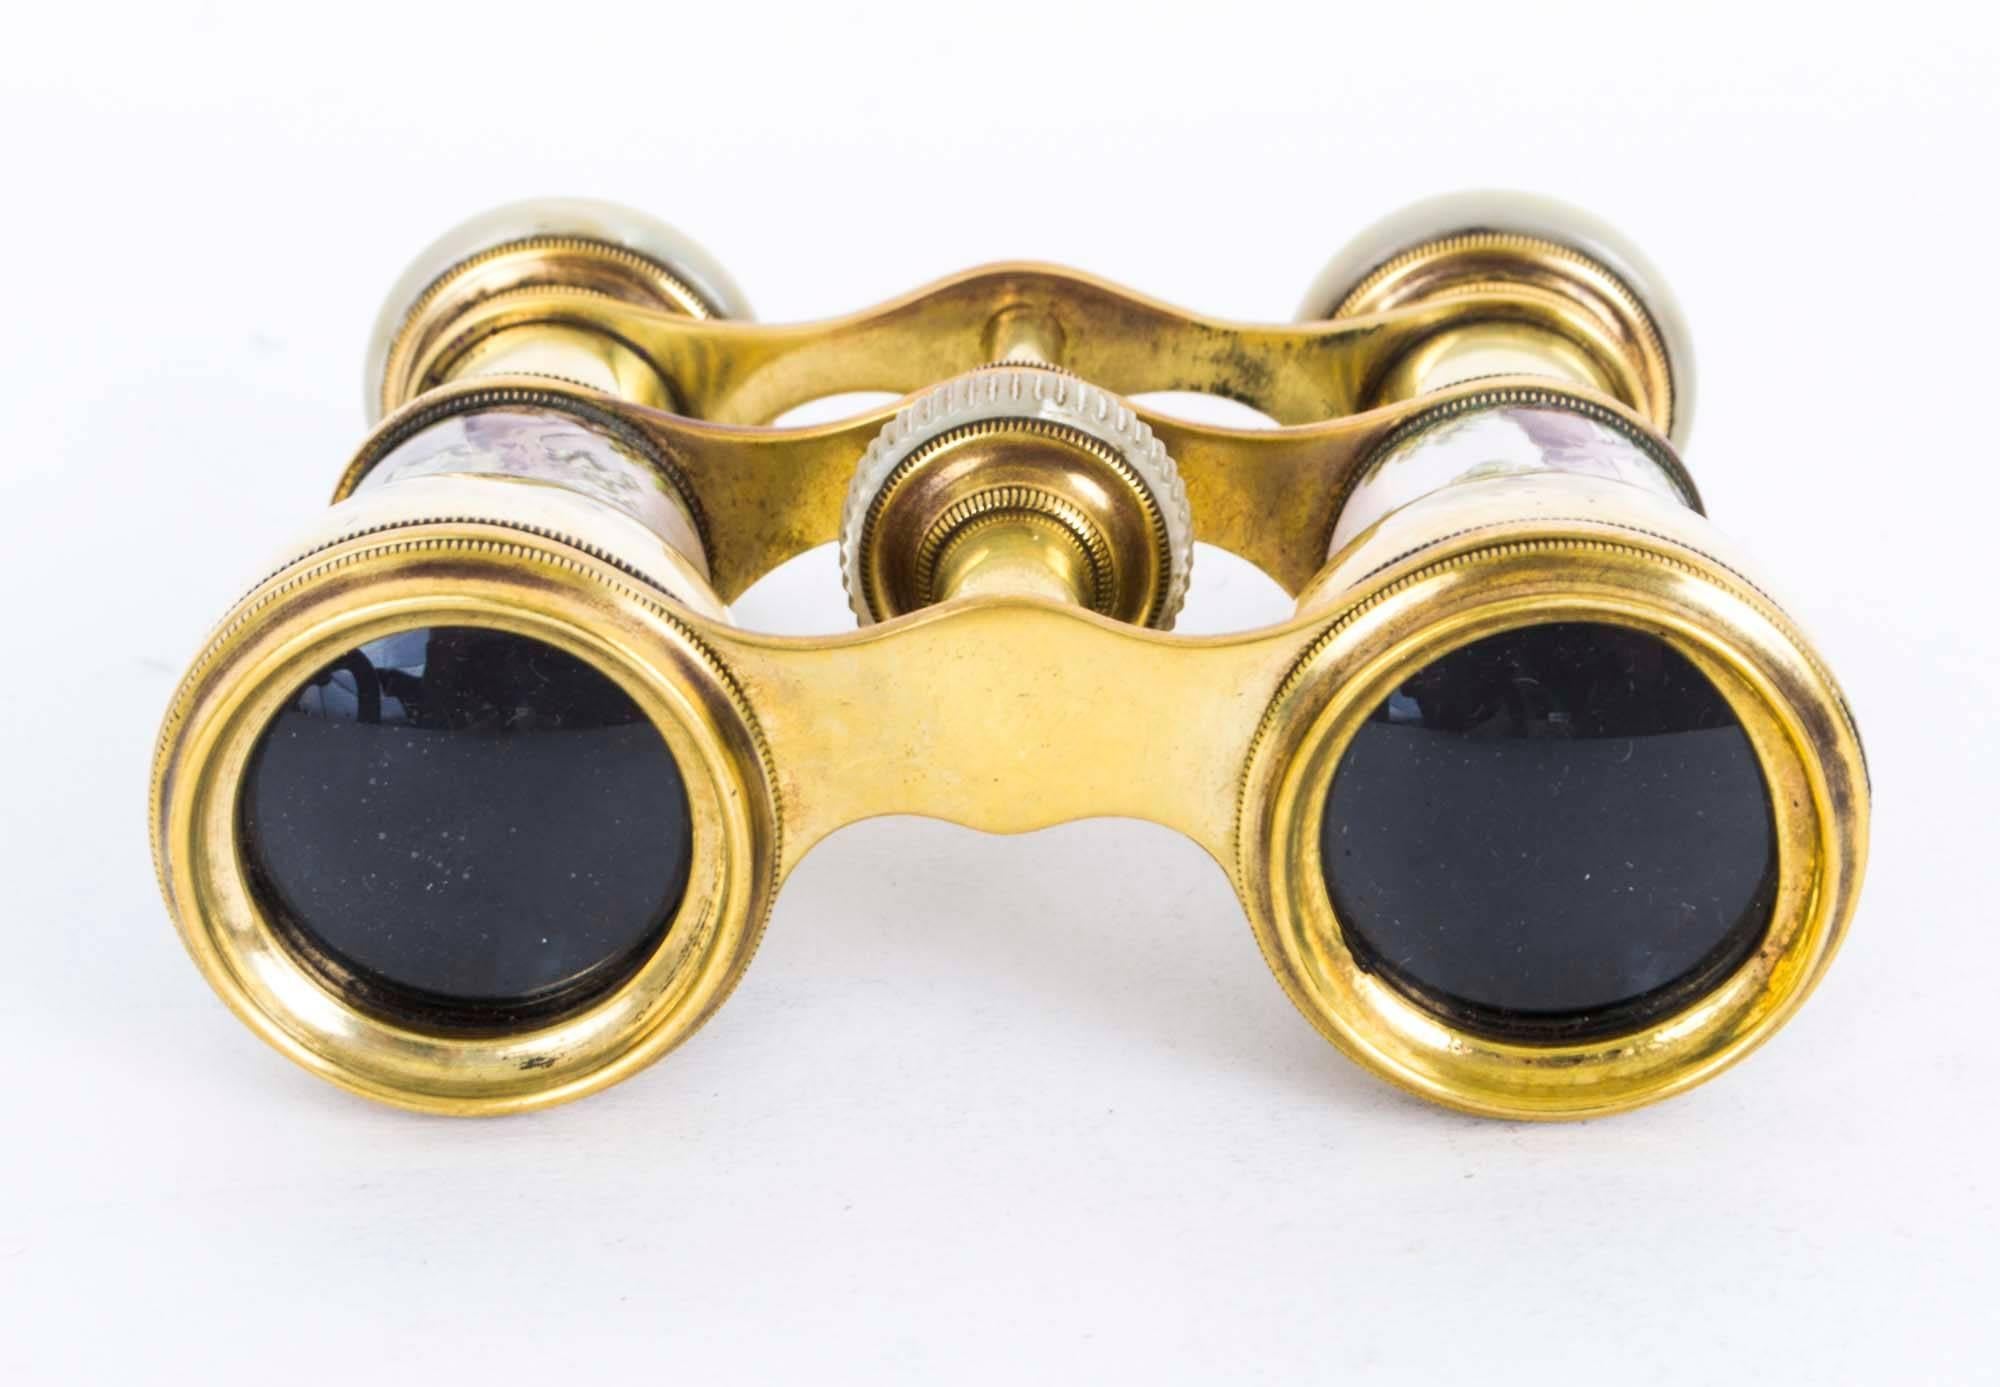 This is a beautiful antique French mother-of-pearl and enamelled ormolu pair of opera glasses in its original leather case, circa 1880 in date.

The telescopic glasses feature beautiful painted country scenes of a courting couple enjoying a